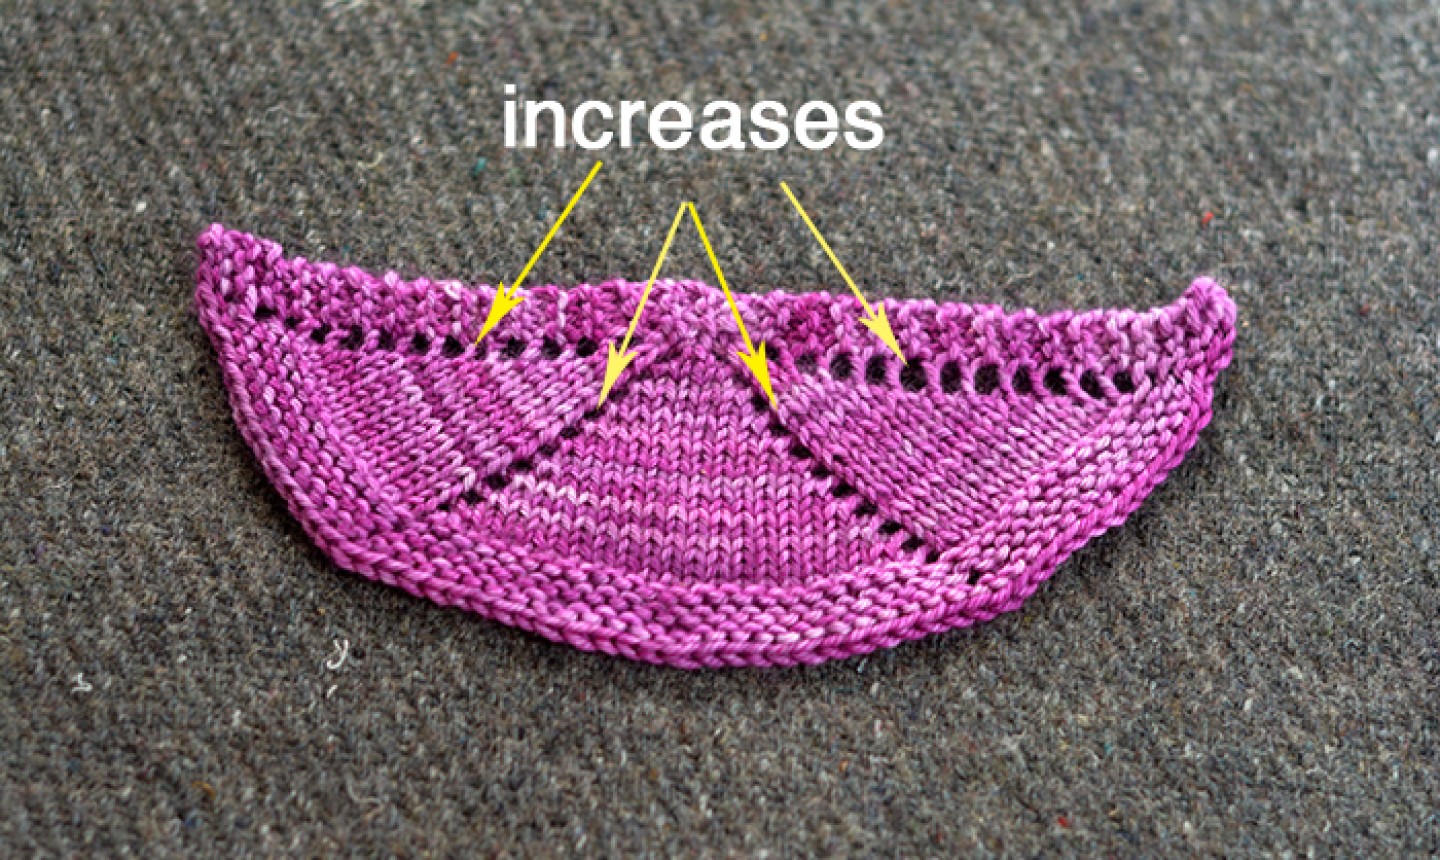 half circle knit shawl shape with increases pointed out